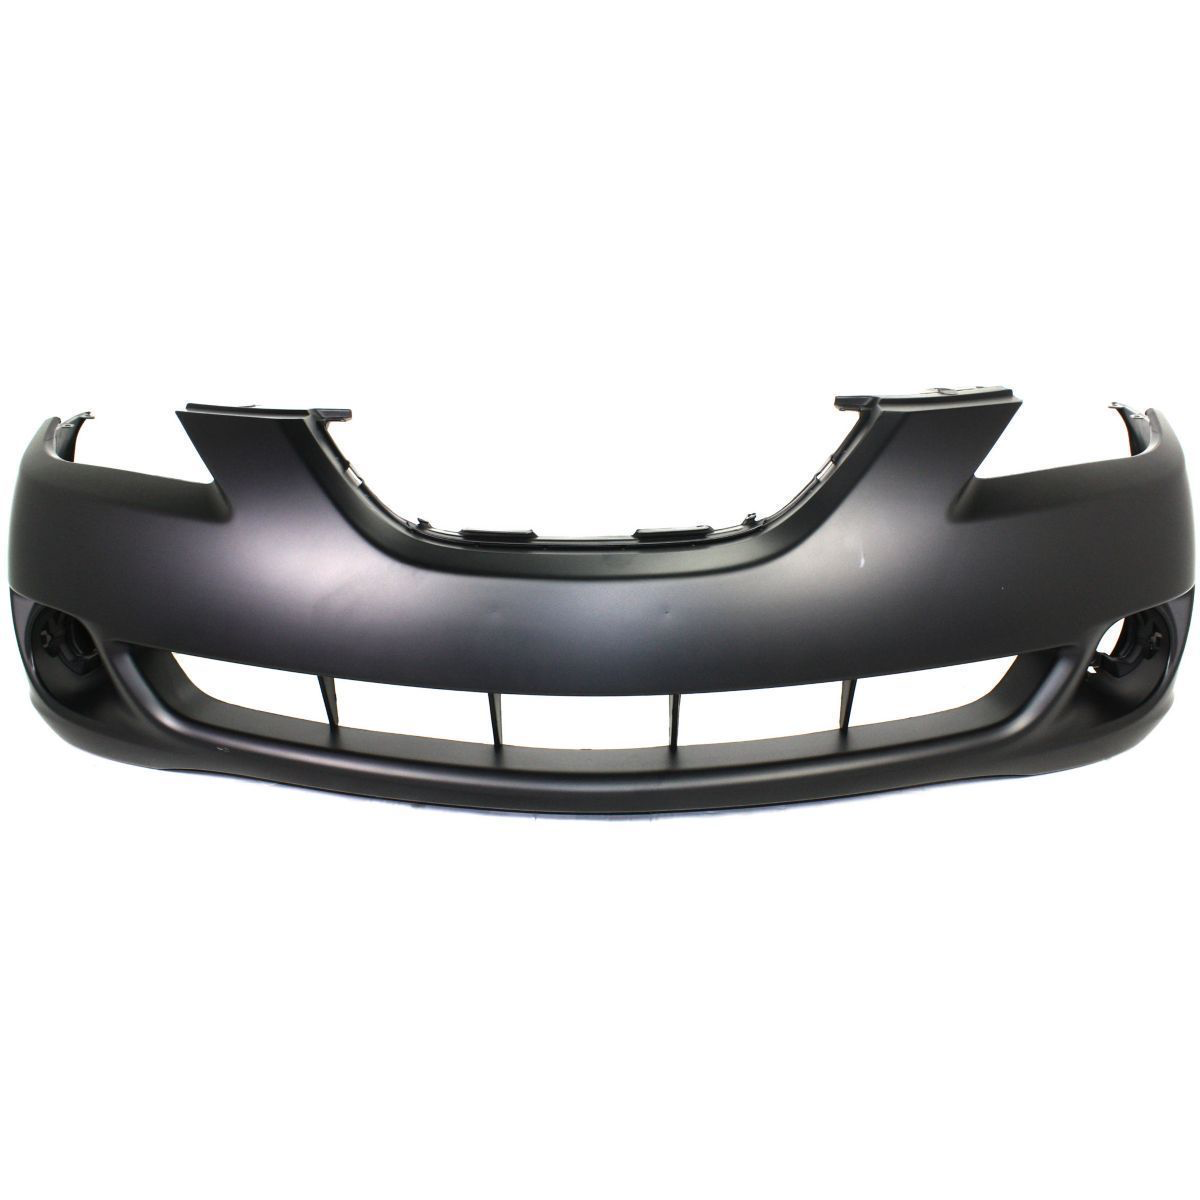 2004-2006 TOYOTA SOLARA Front Bumper Cover Painted to Match